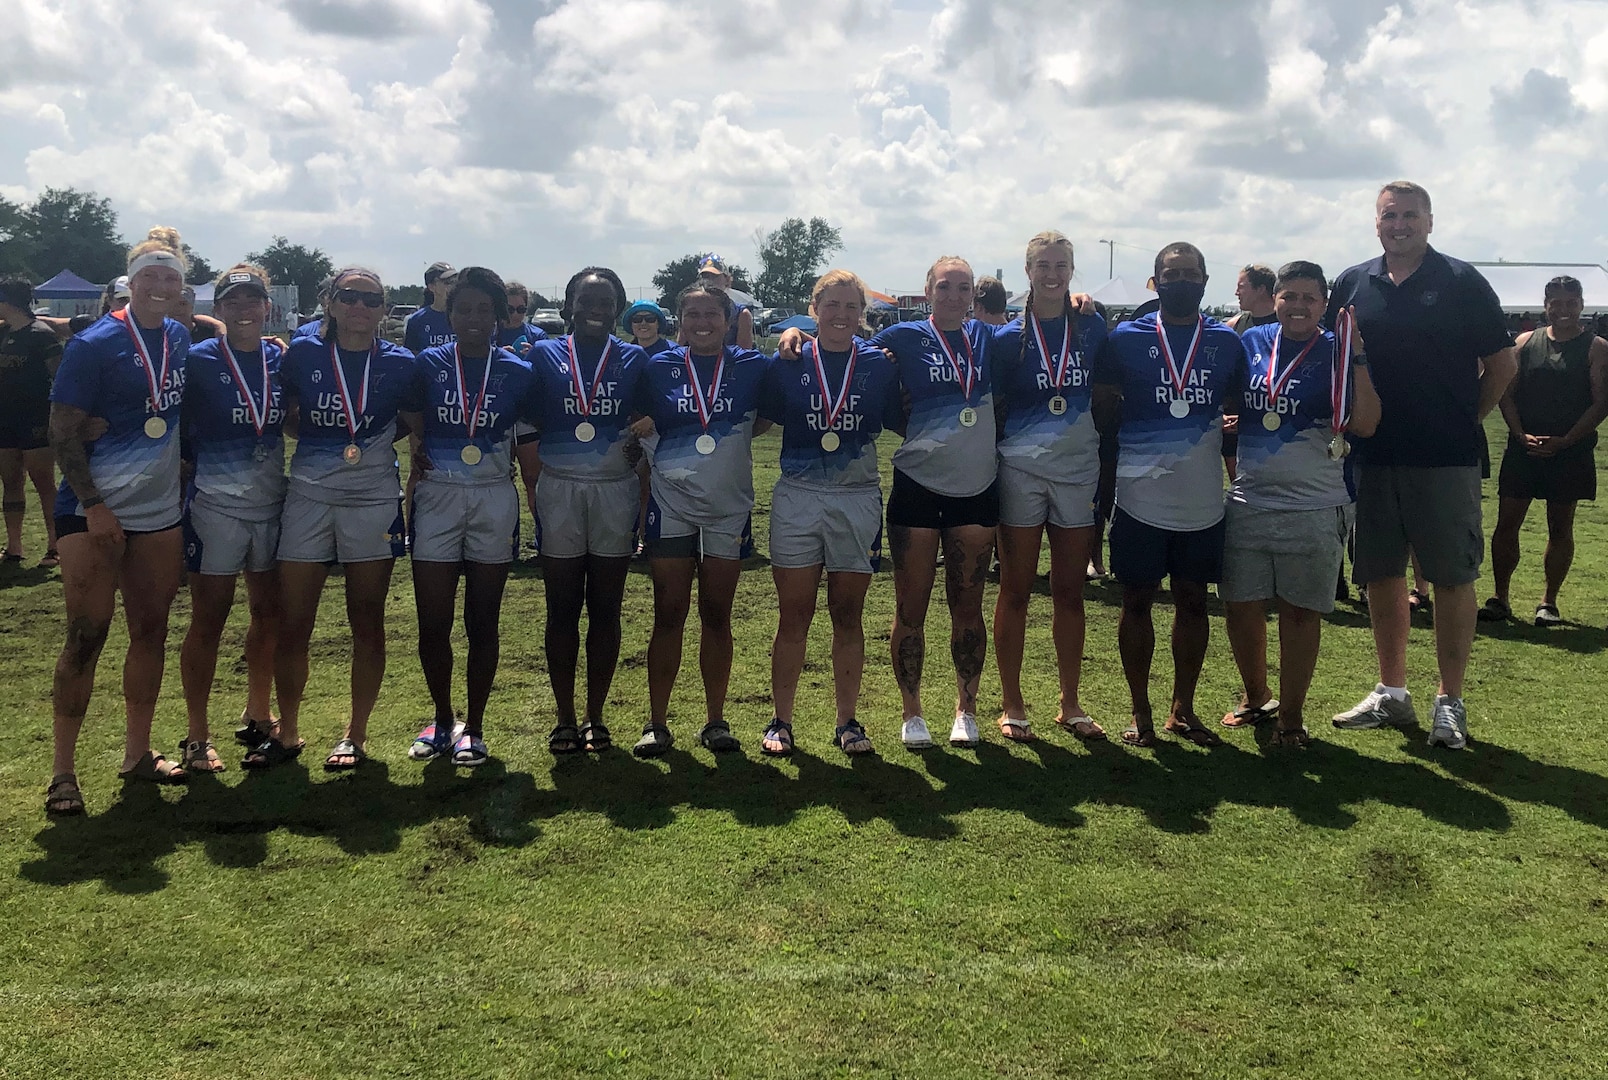 Air Force wins silver at the 2021 Armed Forces Rugby Championship held in conjunction with the 2021 Cape Fear Rugby Sevens Tournament, held from 24-28 June.  Service members from the Army, Marine Corps, Navy, Air Force (with Space Force personnel) and Coast Guard battle it out for gold.  (Department of Defense Photo, Released)